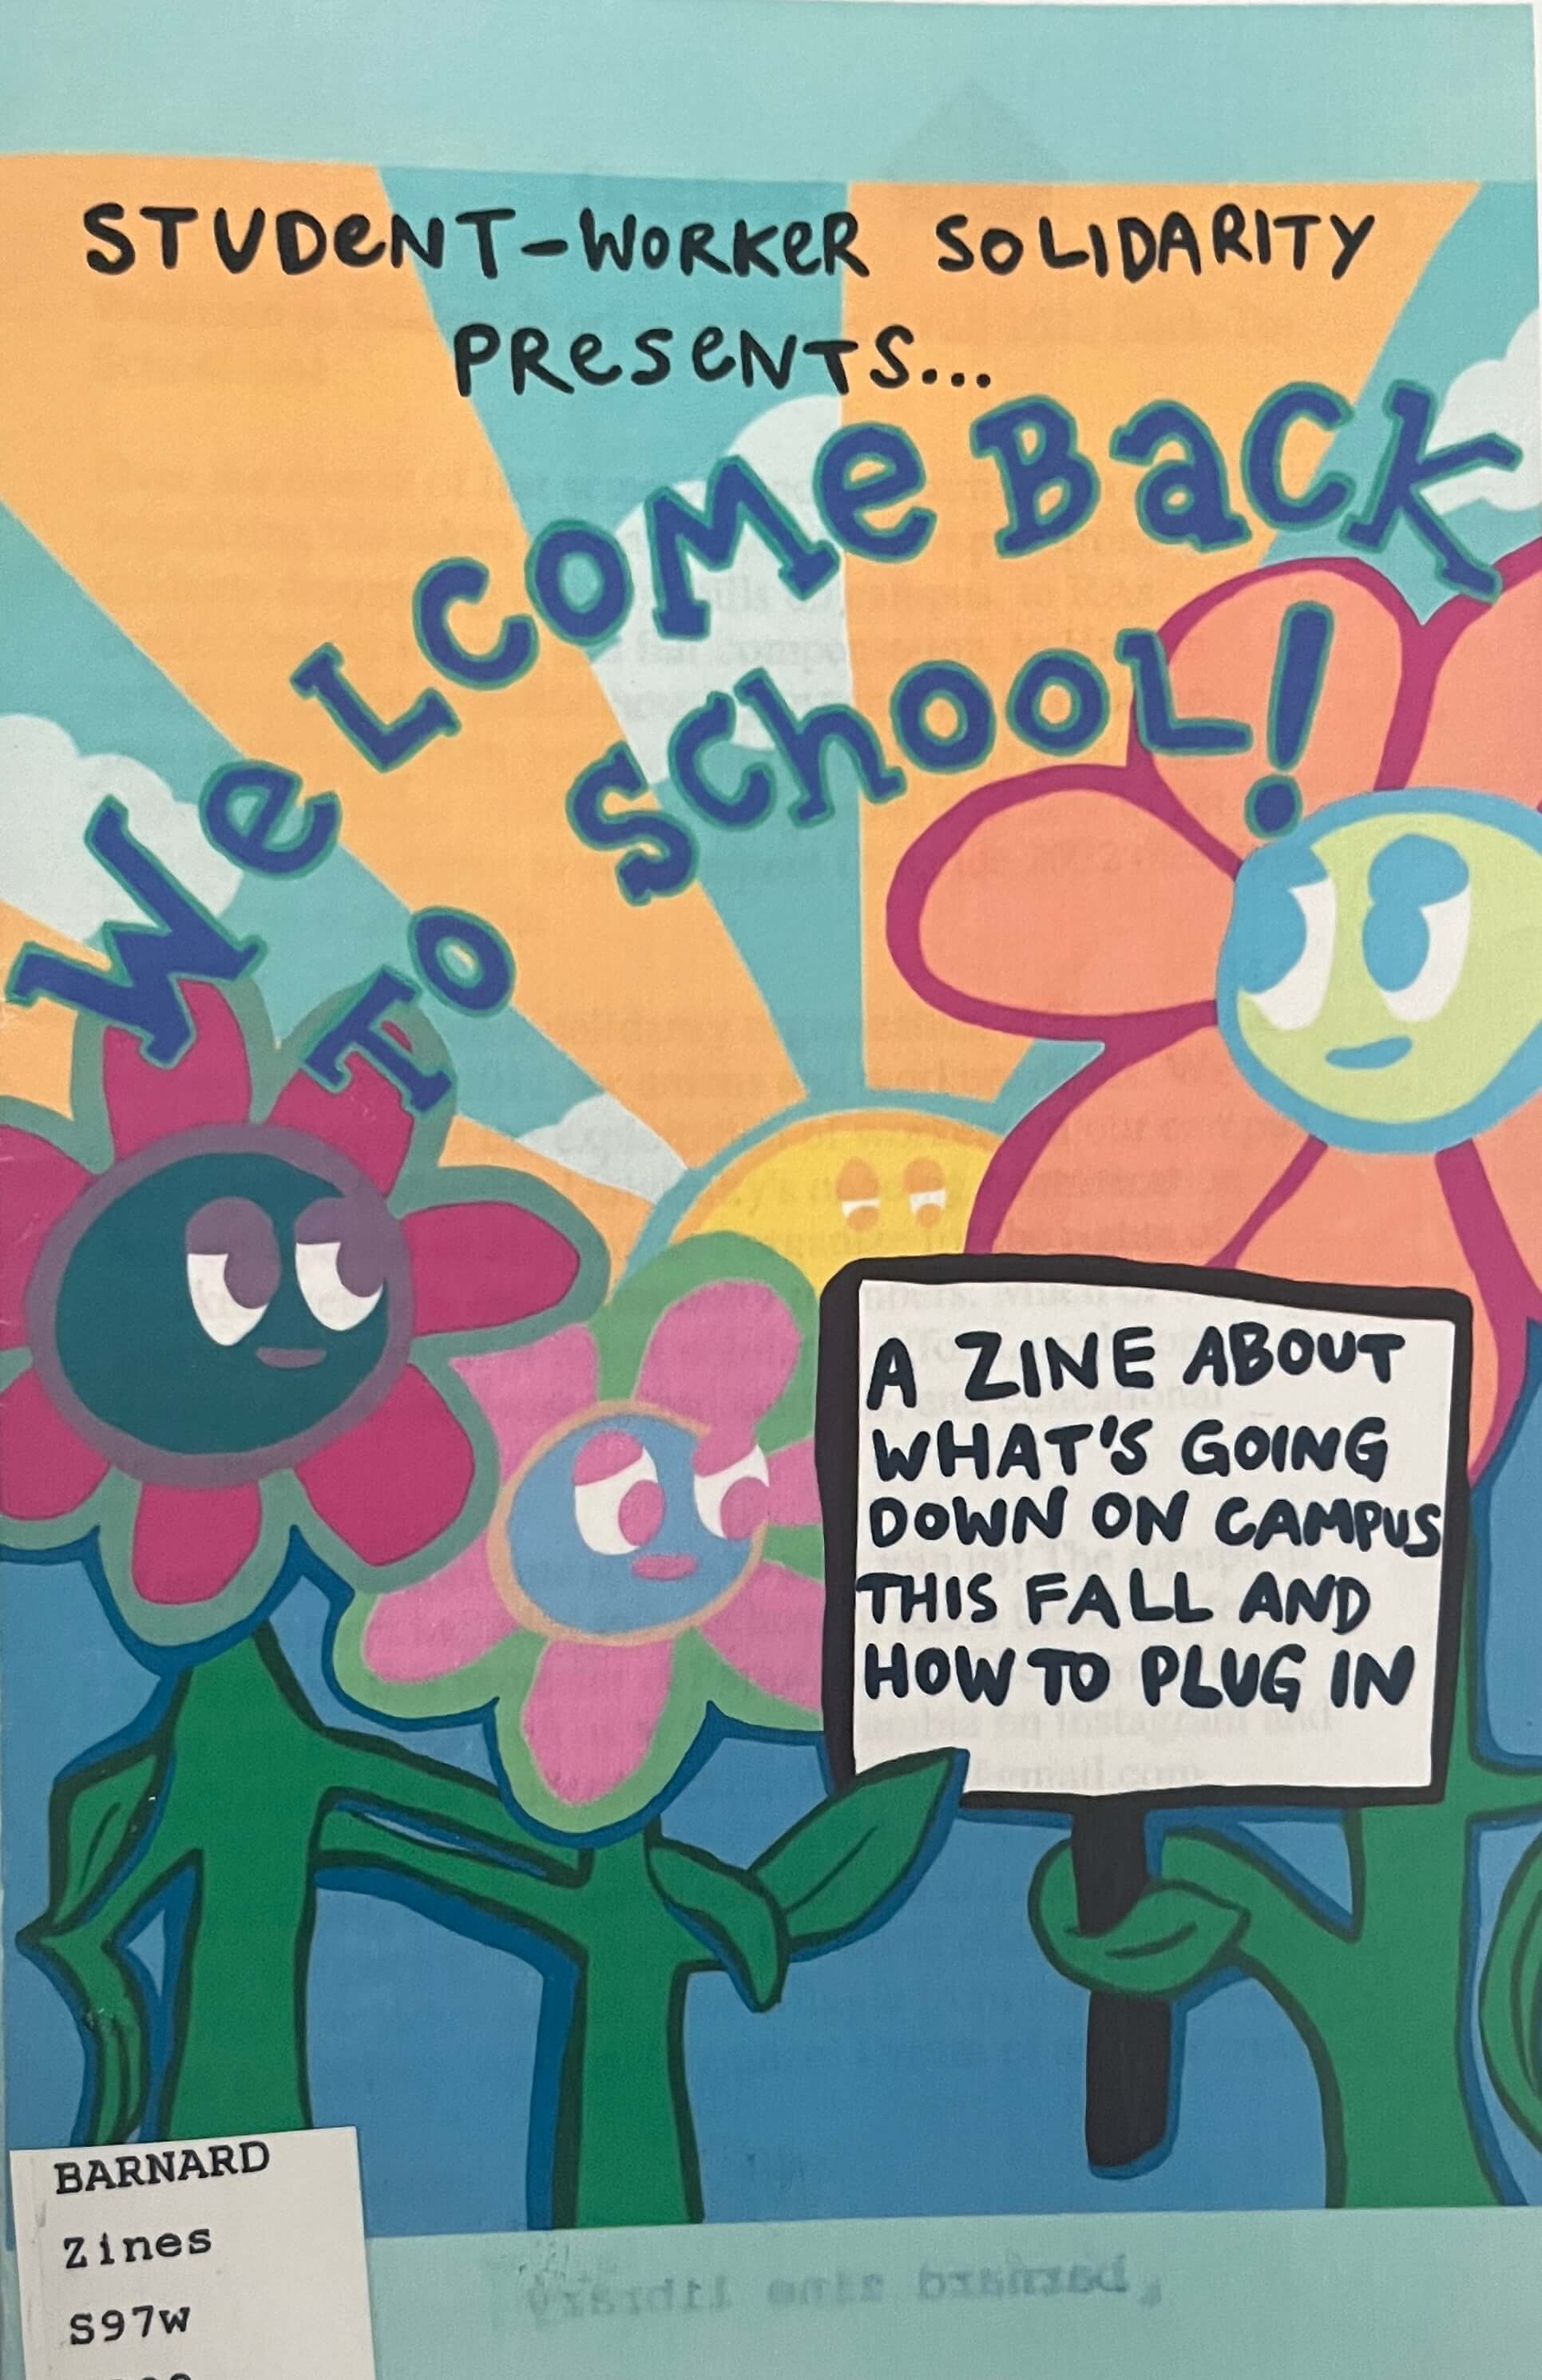 the cover of welcome back to school! zine